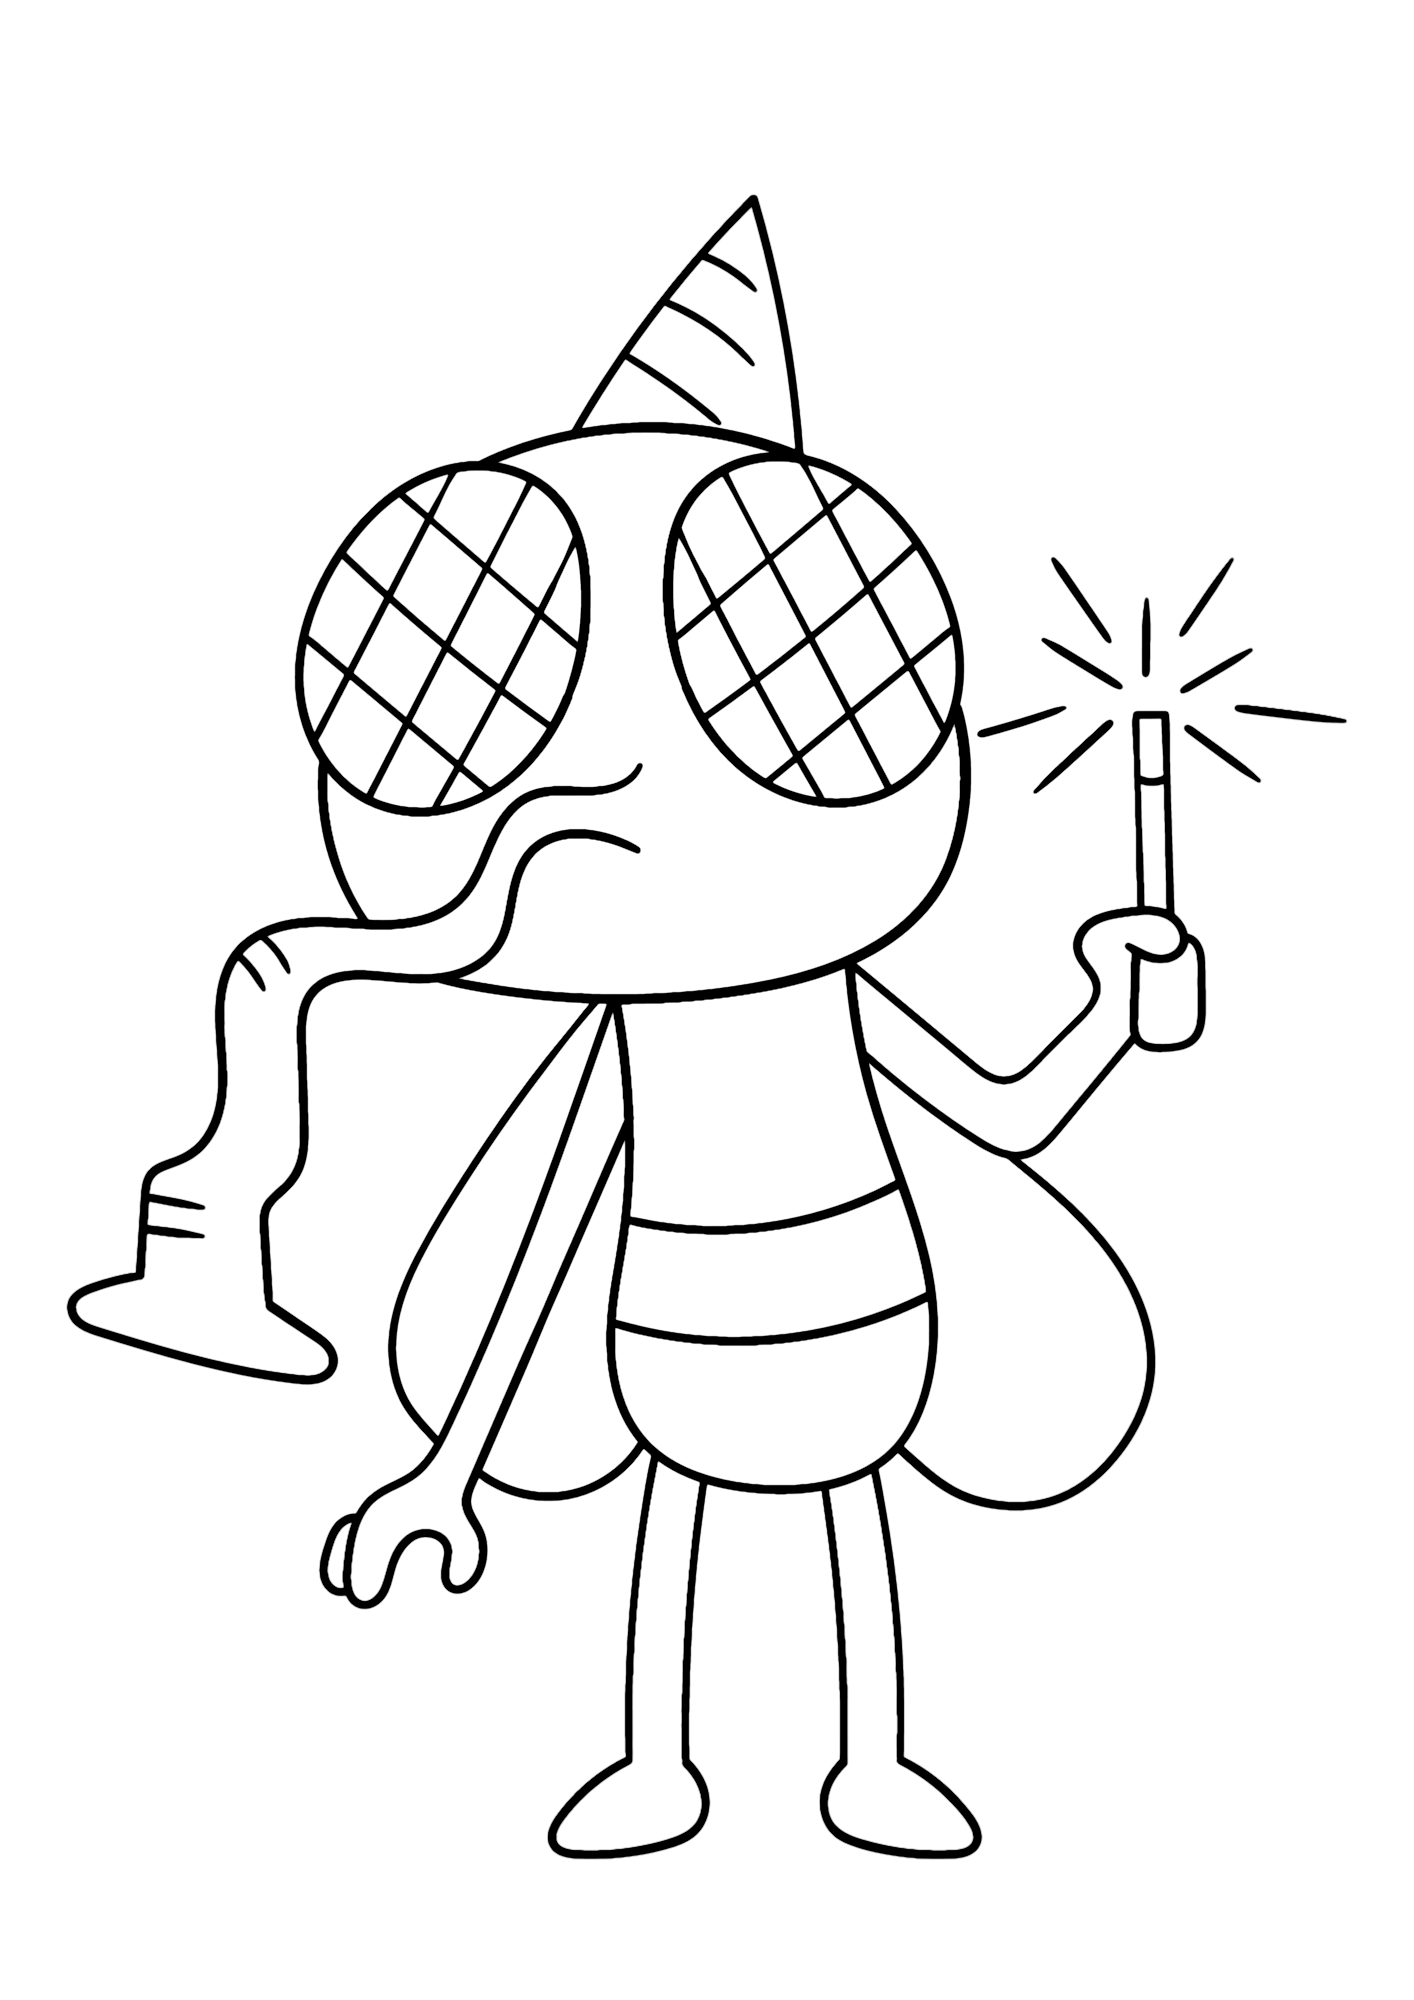 Fly Coloring Pages For Kids